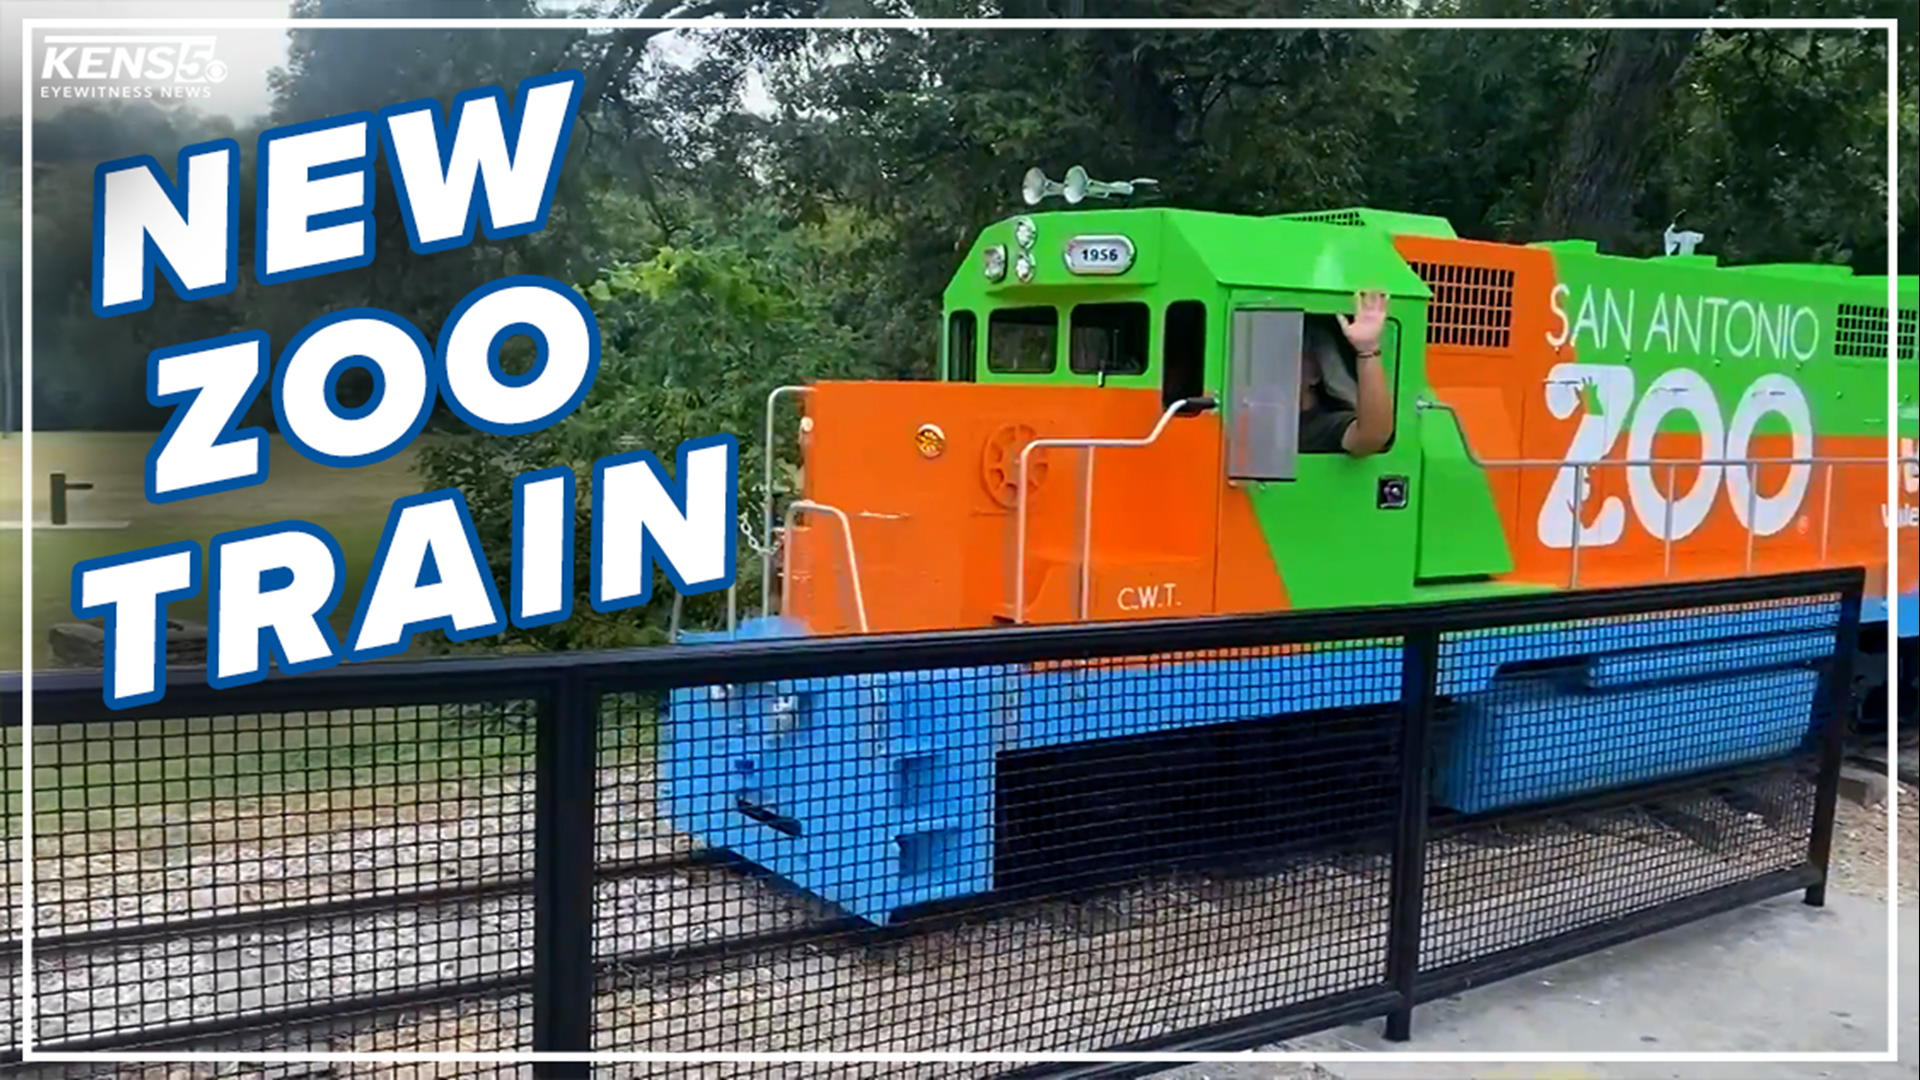 The San Antonio Zoo's new train arrived Monday. The first 50 riders who purchase a train ticket for the inaugural rides will get some some special goodies.